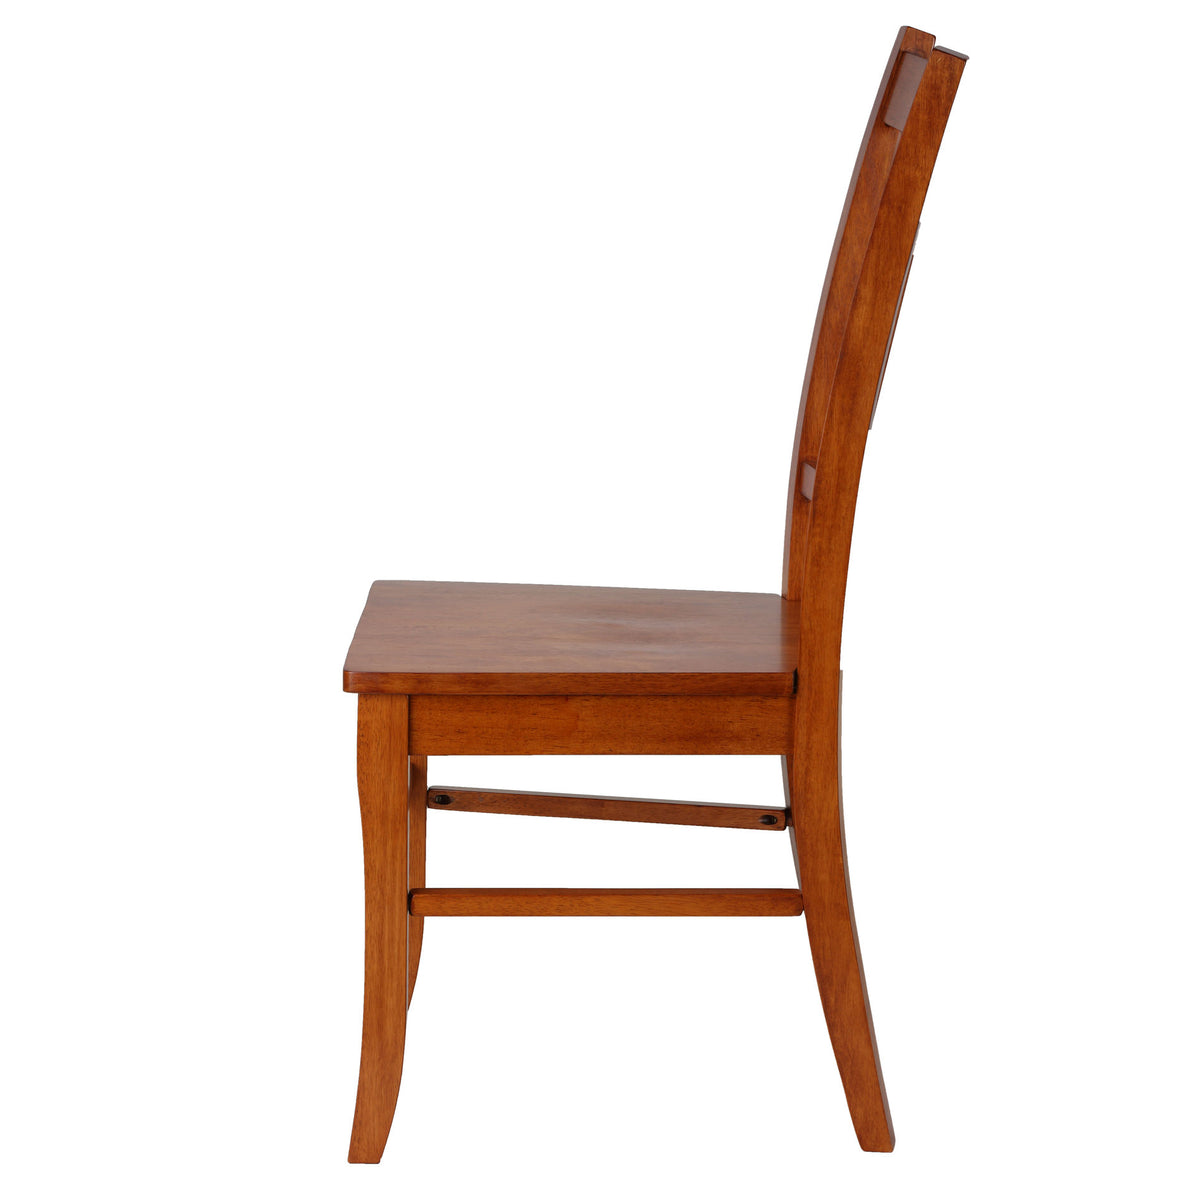 Cortesi Home &quot;America&quot; Mission Style Wooden Dining Chairs, Set of 2,Honey Oak